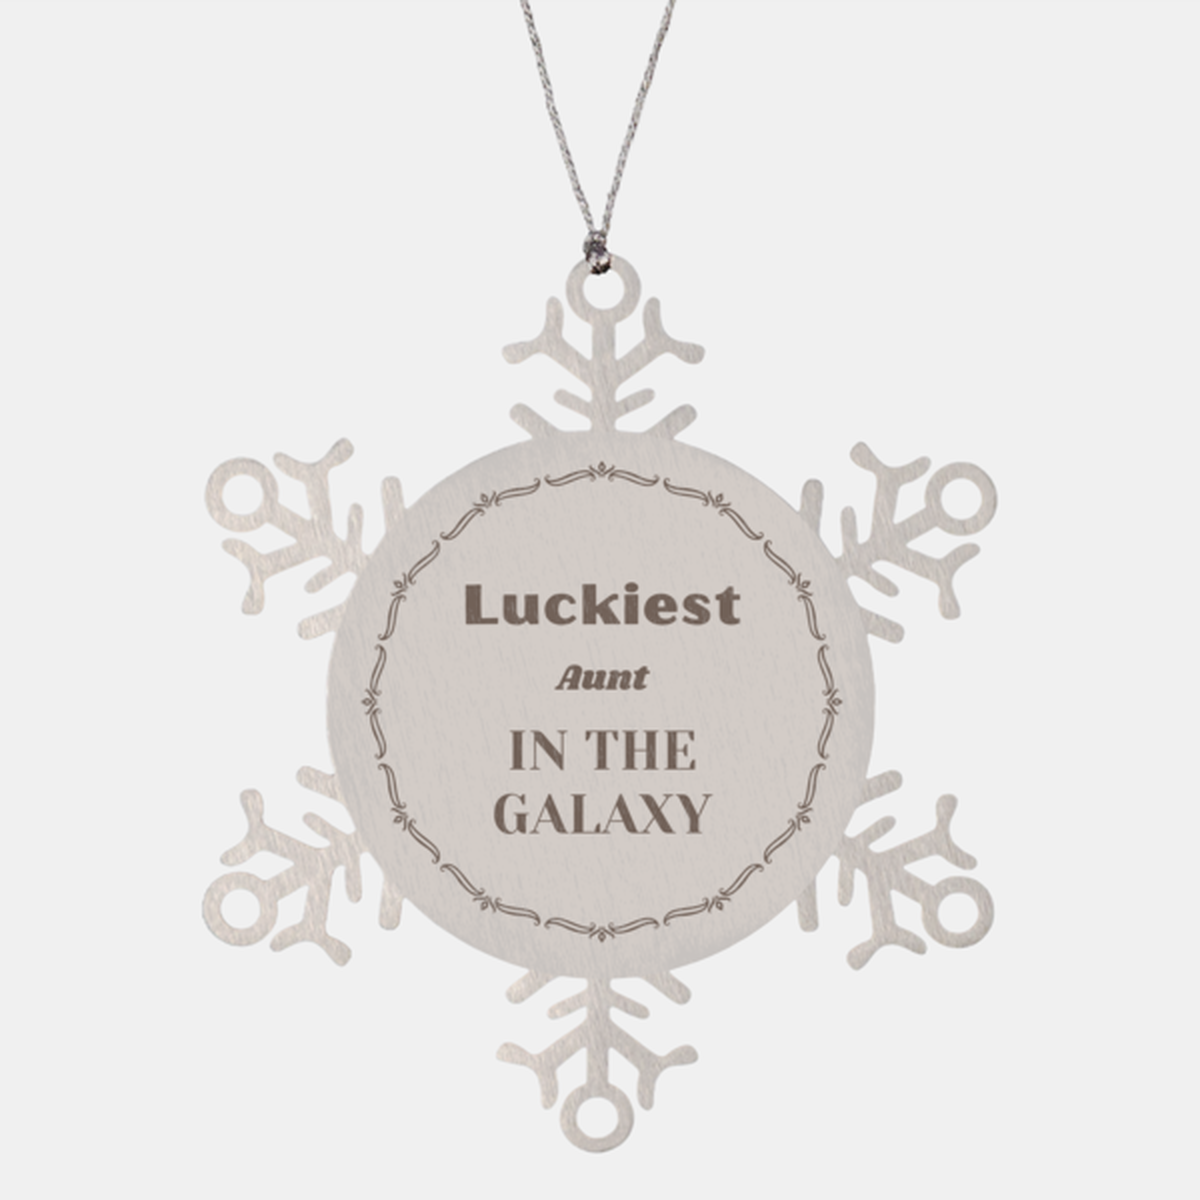 Luckiest Aunt in the Galaxy, To My Aunt Ornament Gifts, Christmas Aunt Snowflake Ornament Gifts, X-mas Decorations Unique Gifts For Aunt Men Women